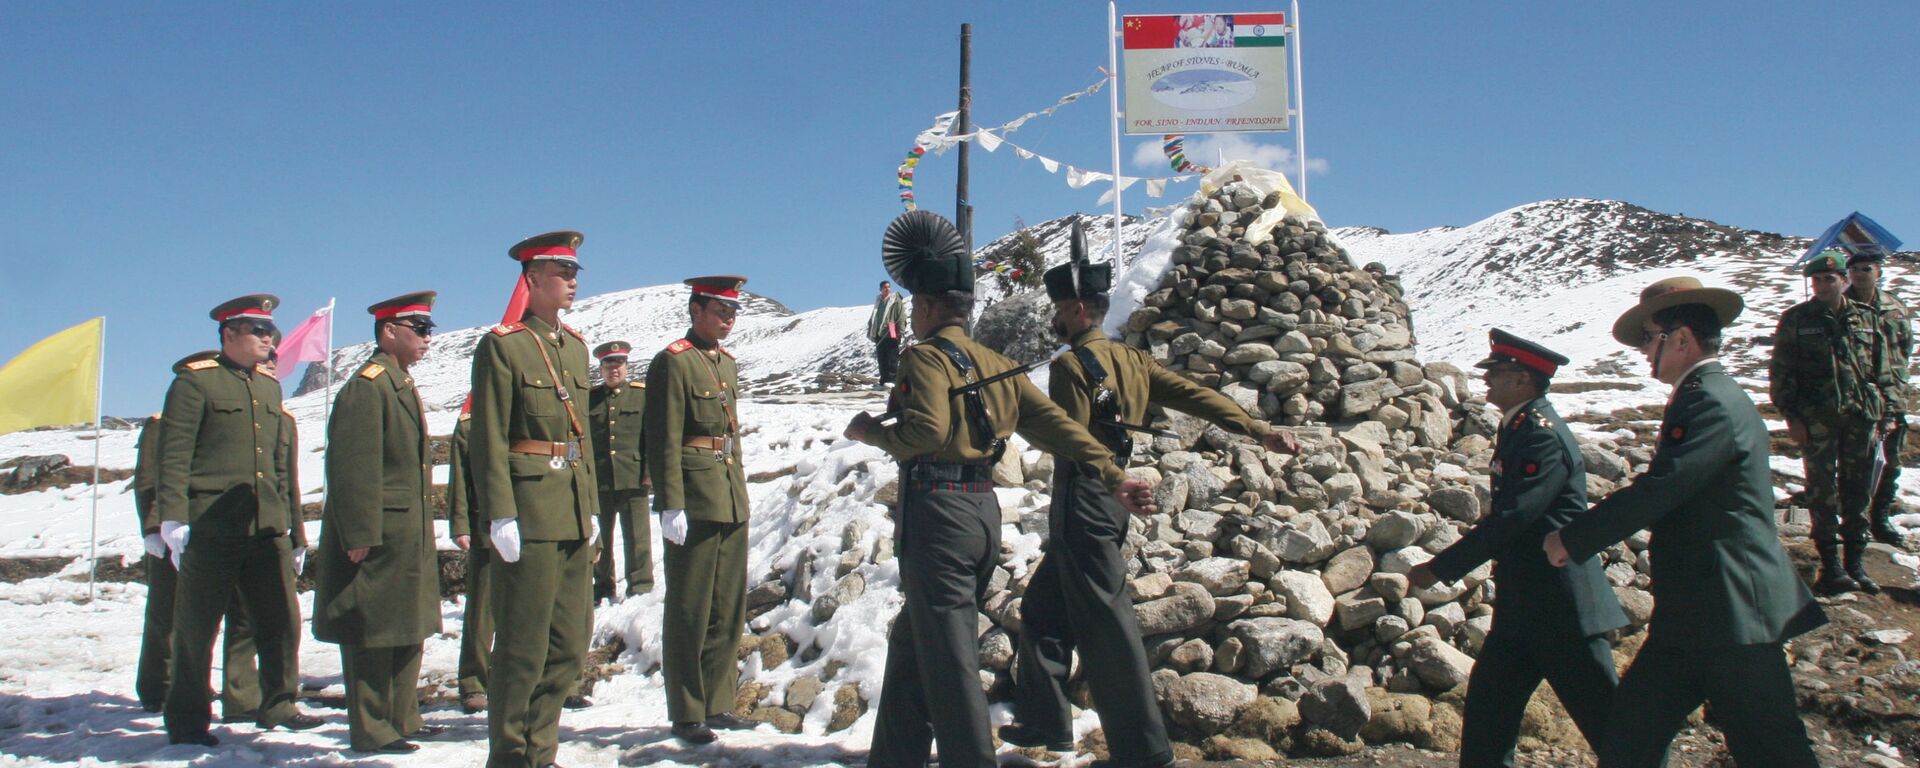 A delegation of the Indian Army, right, marches to meet the delegation of the Chinese army, left, at a Border Personnel Meeting (BPM) on the Chinese side of the Line of Actual Control at Bumla, Indo-China Border, Monday, Oct. 30, 2006 - Sputnik International, 1920, 25.01.2021